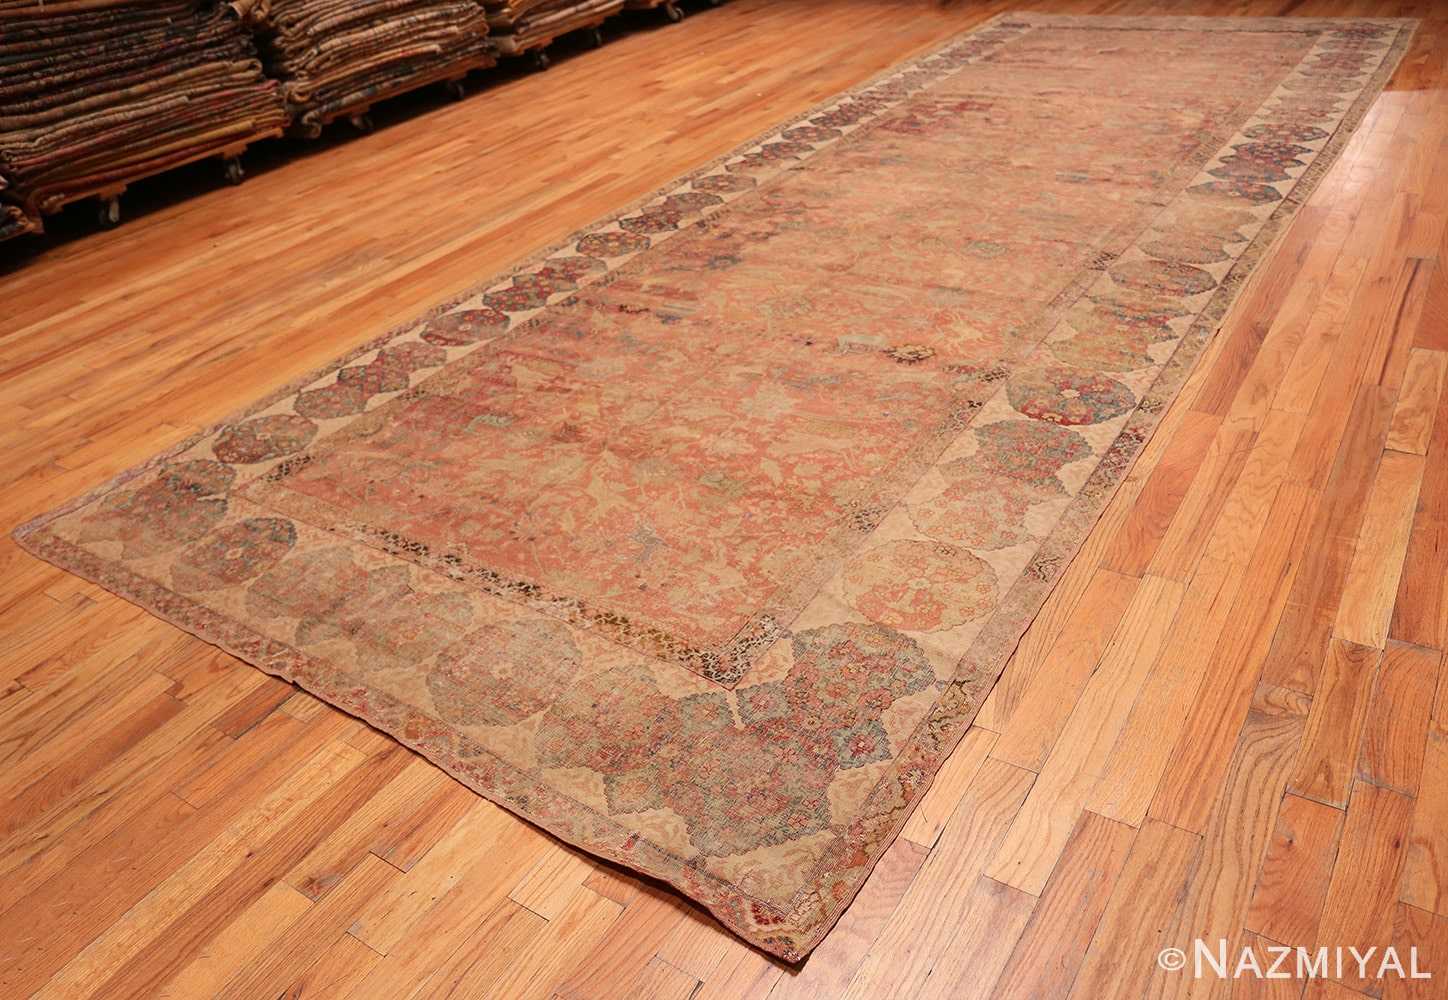 Full Antique gallery size 17th Century Isfahan Persian rug 3338 by Nazmiyal